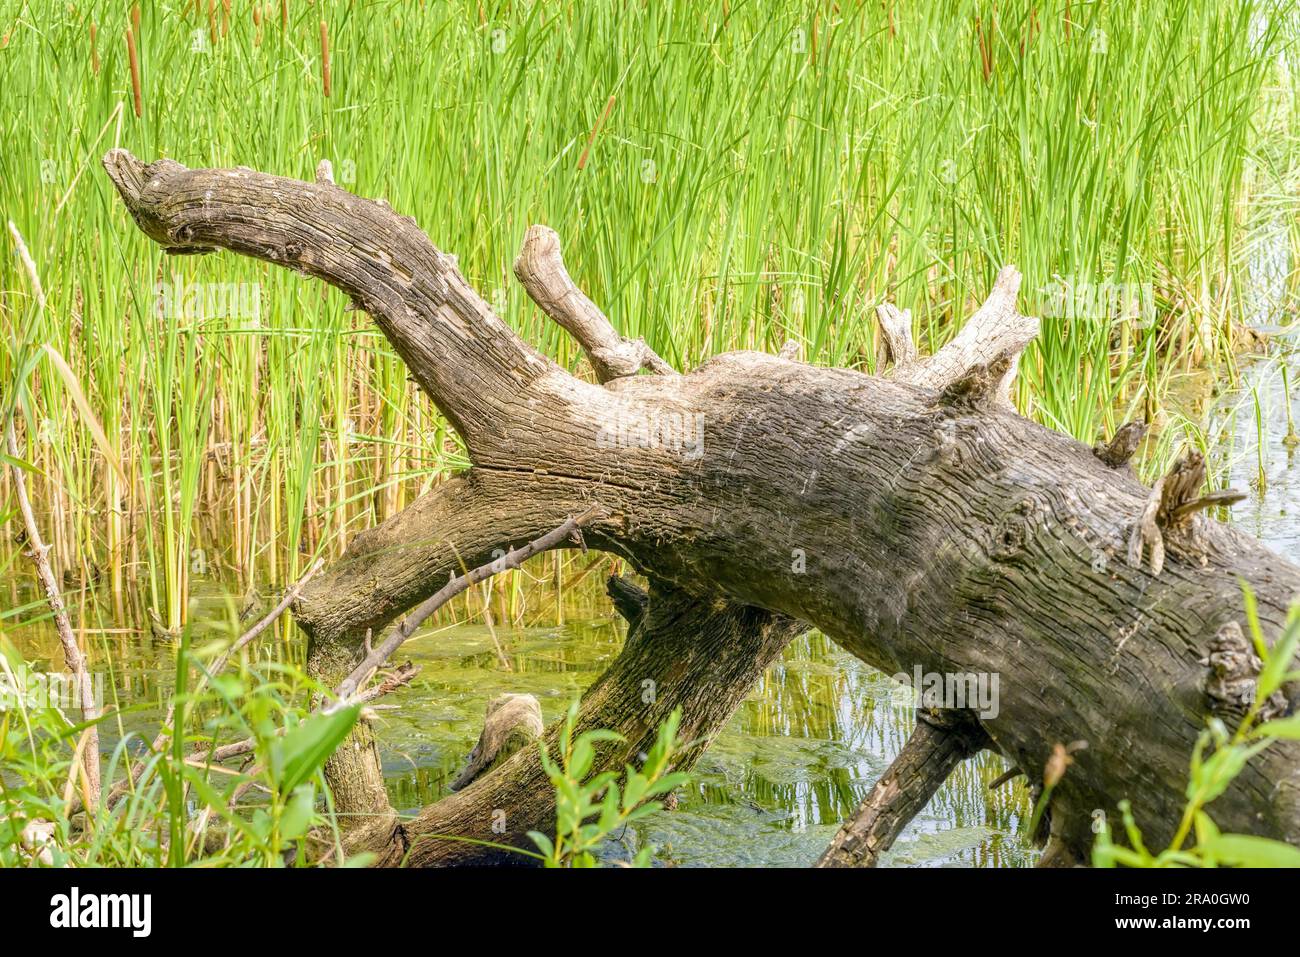 An uprooted tree detail in the river with (Typha Latifolia) reeds in the background Stock Photo